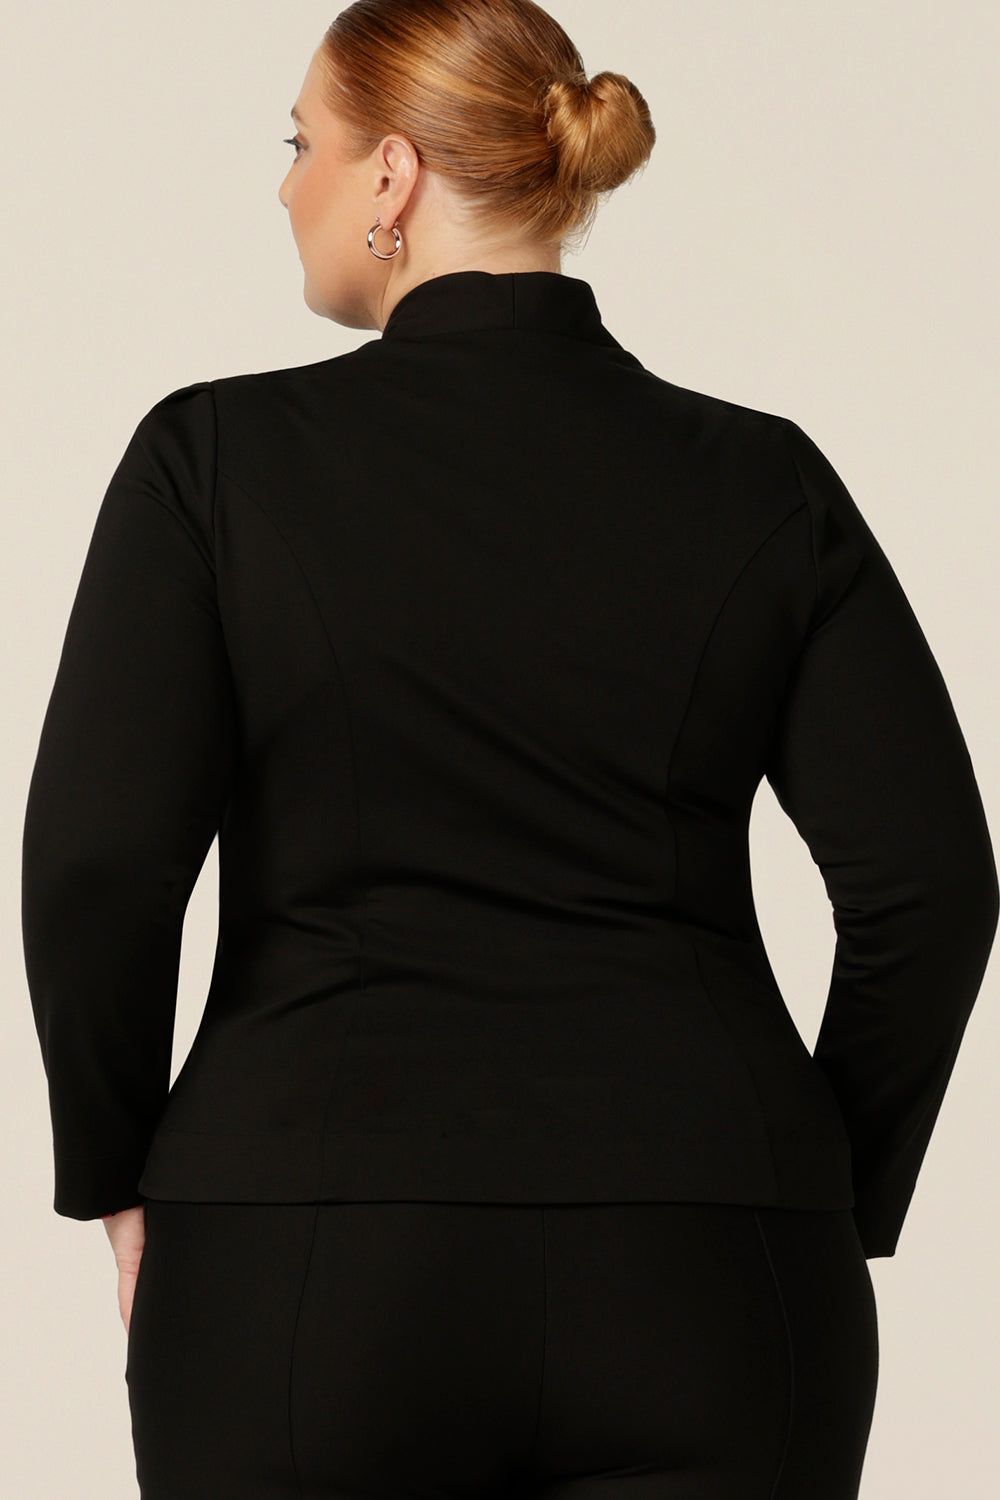 Back view of a size 18, fuller figure woman wearing a soft tailored black jacket with black workwear pants. Made in Australia for petite to plus sizes, the stretch ponte jersey is well-fitting on womanly curves. 